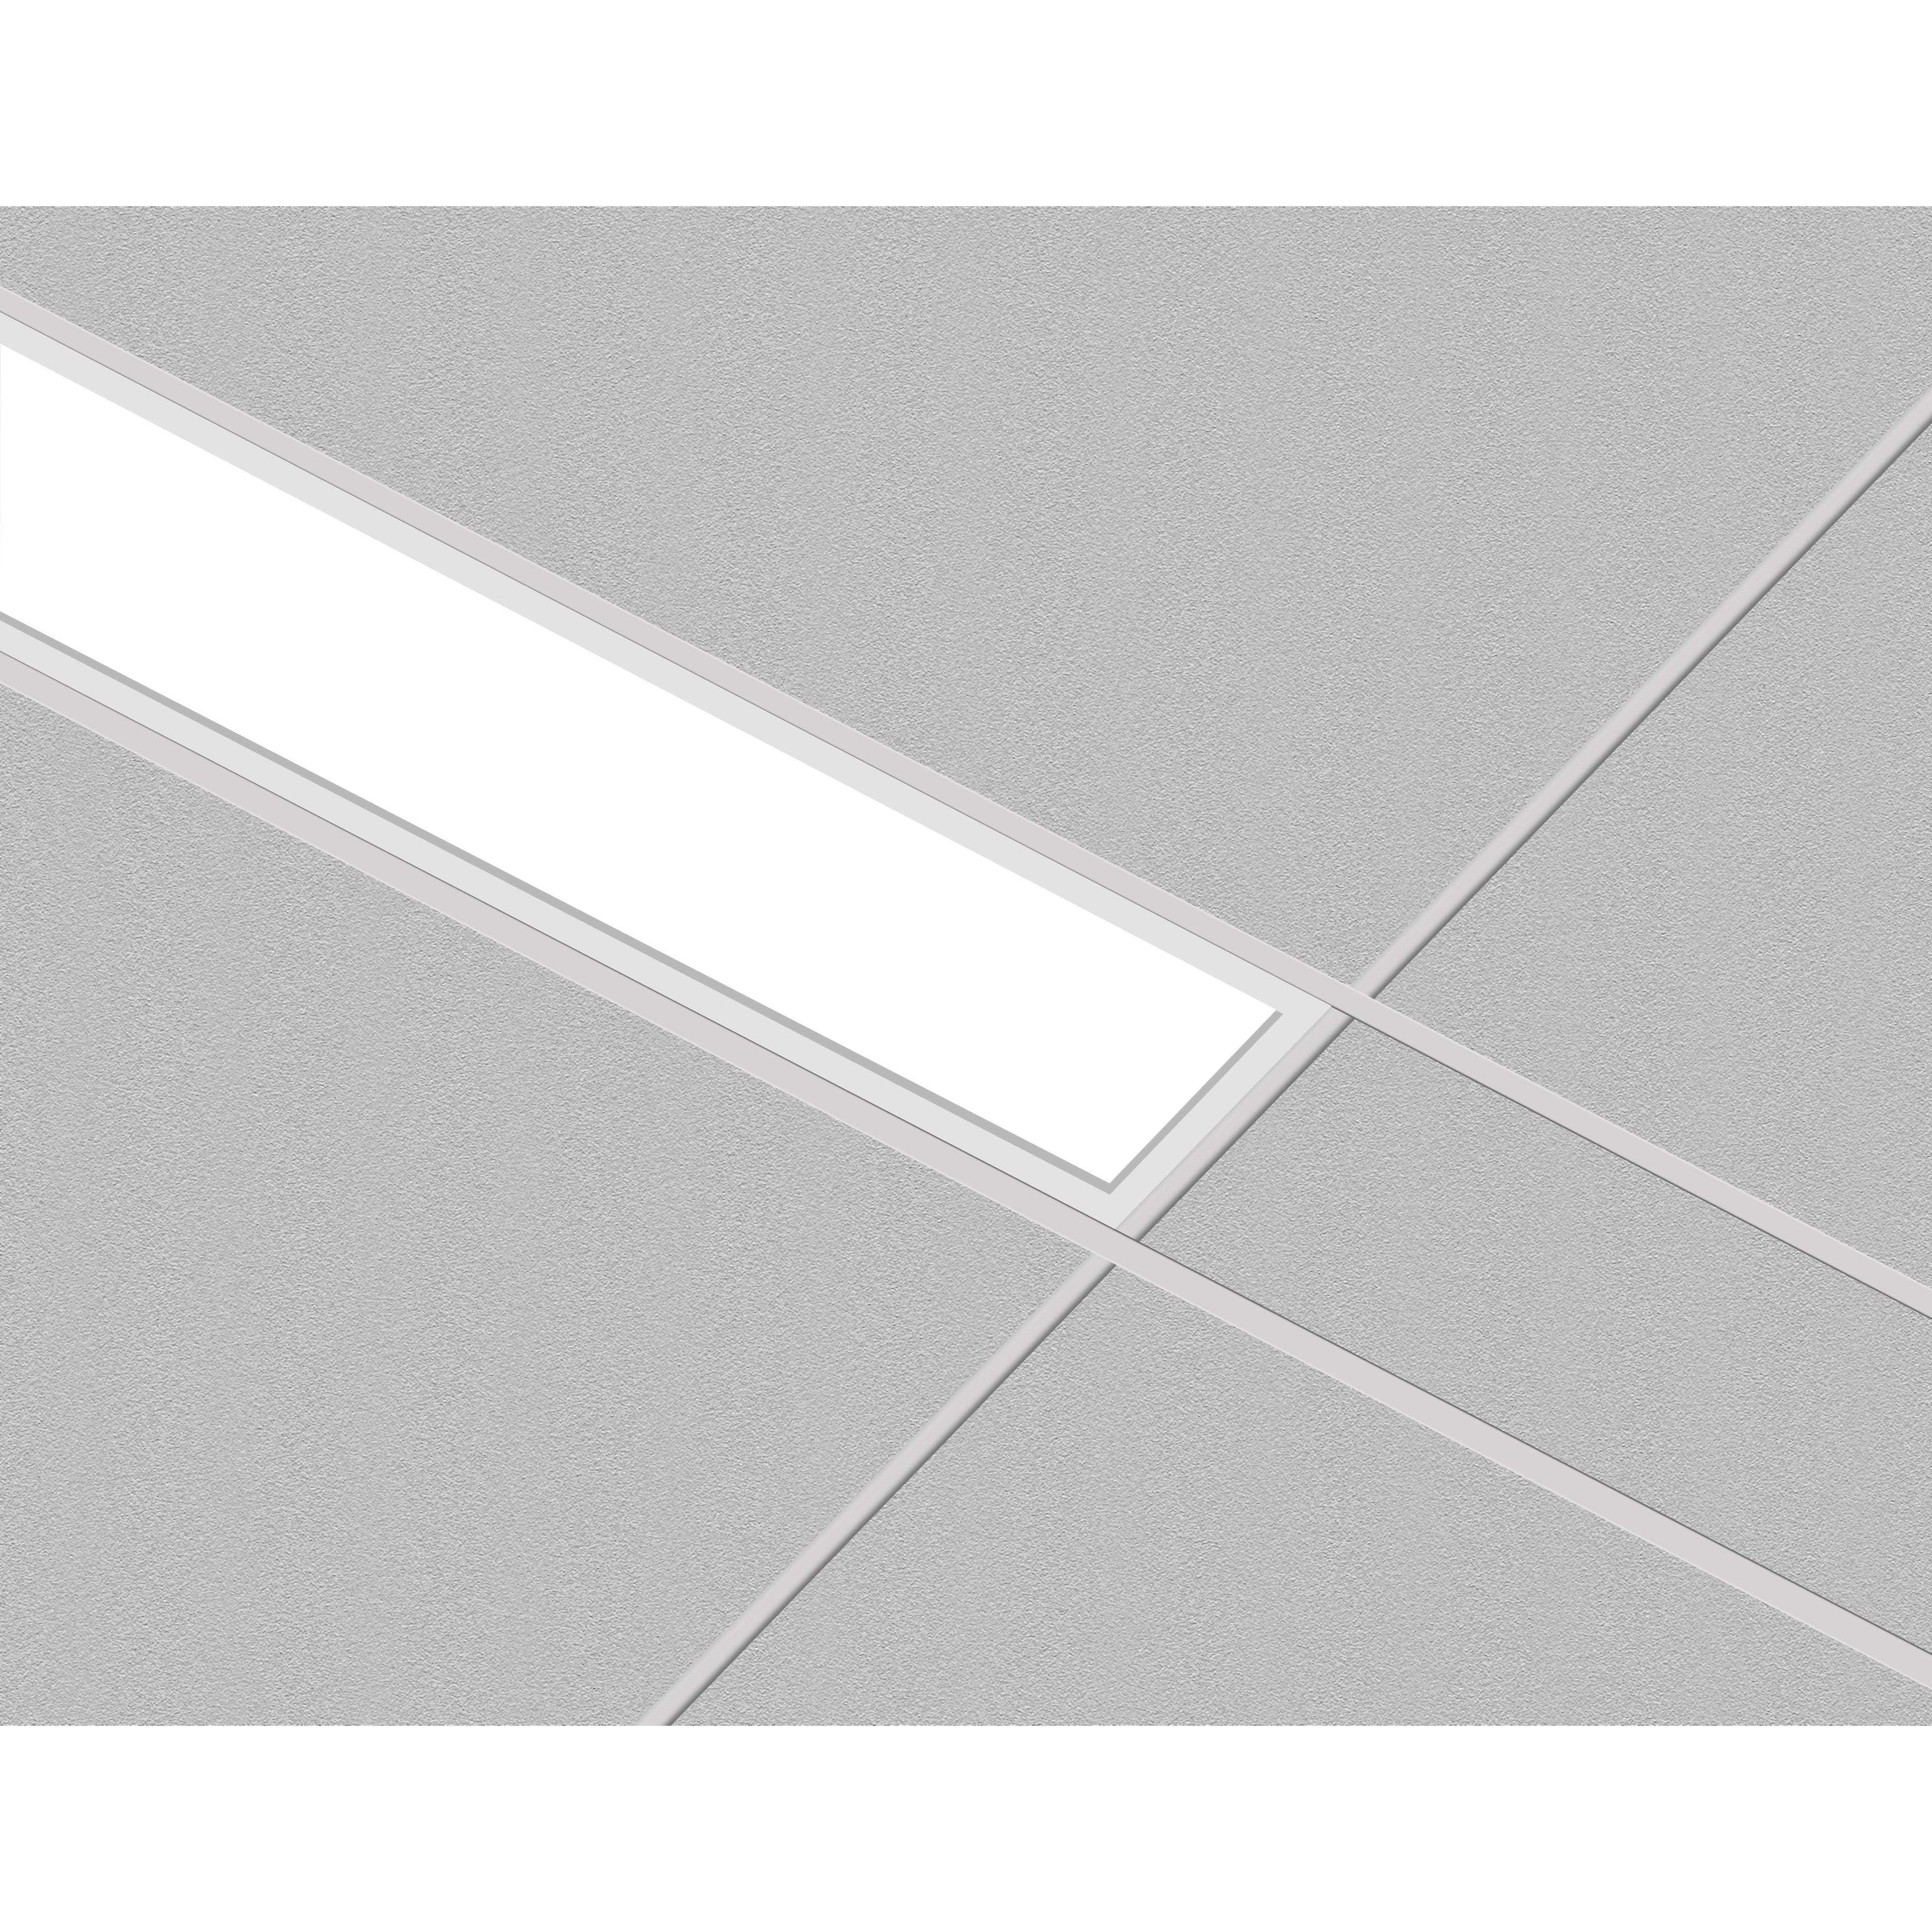 POE Texas Lighting Denton Linear Recessed PoE Lights - 4 in x 2 ft (Recessed)